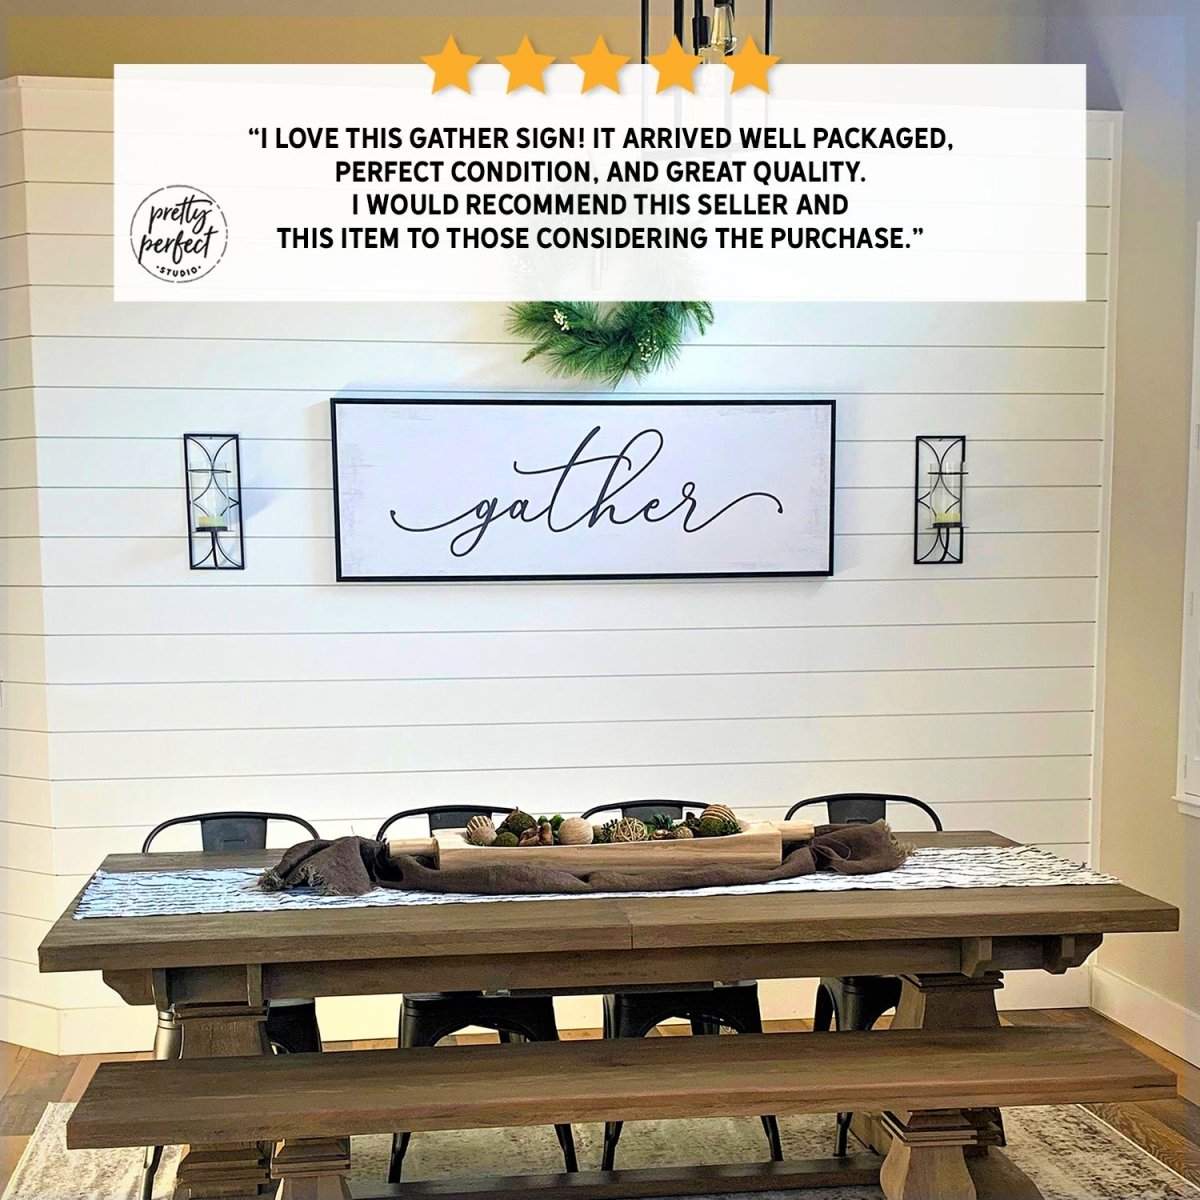 Customer product review for gather sign by Pretty Perfect Studio